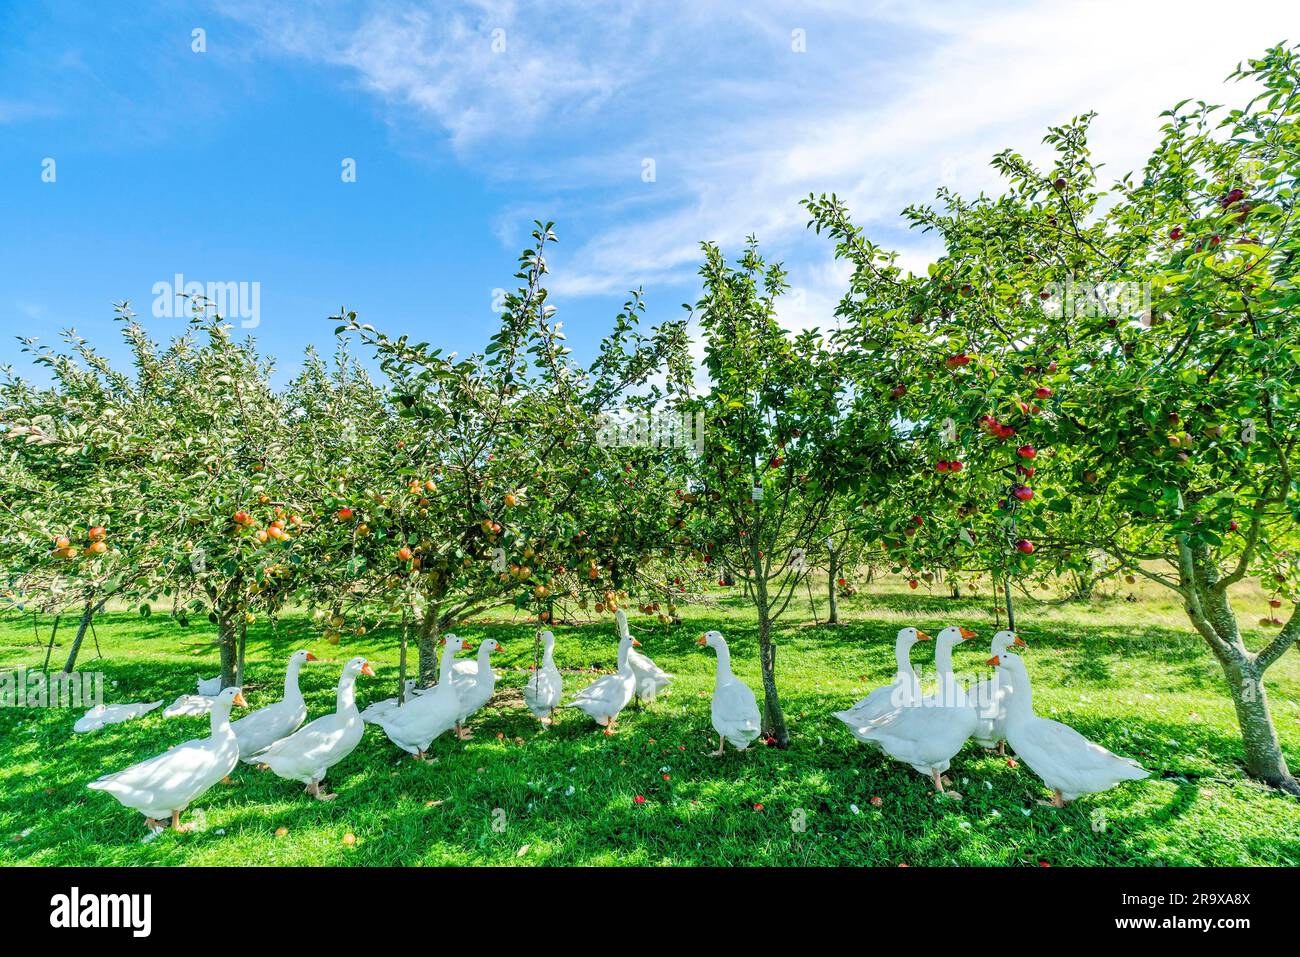 Geese under apple trees in a rural environment in the summer Stock Photo